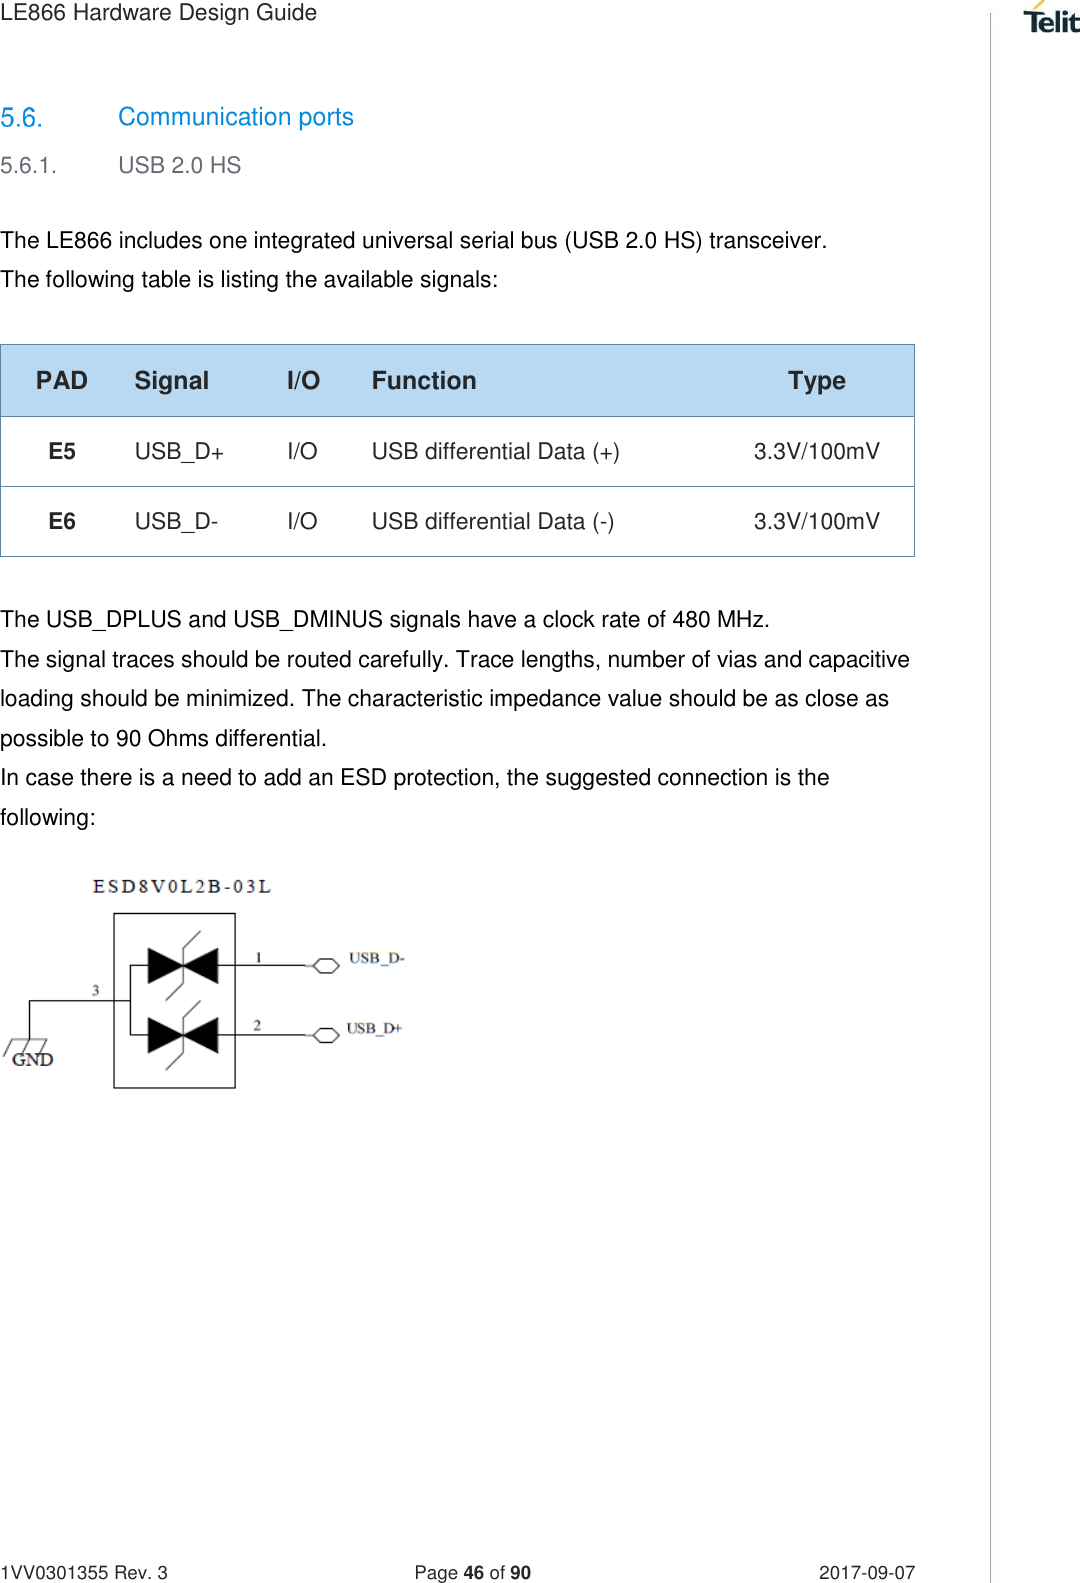 LE866 Hardware Design Guide   1VV0301355 Rev. 3   Page 46 of 90 2017-09-07    Communication ports 5.6.1.  USB 2.0 HS  The LE866 includes one integrated universal serial bus (USB 2.0 HS) transceiver. The following table is listing the available signals: PAD Signal I/O Function Type E5 USB_D+ I/O USB differential Data (+) 3.3V/100mV E6 USB_D- I/O USB differential Data (-) 3.3V/100mV  The USB_DPLUS and USB_DMINUS signals have a clock rate of 480 MHz.  The signal traces should be routed carefully. Trace lengths, number of vias and capacitive loading should be minimized. The characteristic impedance value should be as close as possible to 90 Ohms differential.  In case there is a need to add an ESD protection, the suggested connection is the following:                   